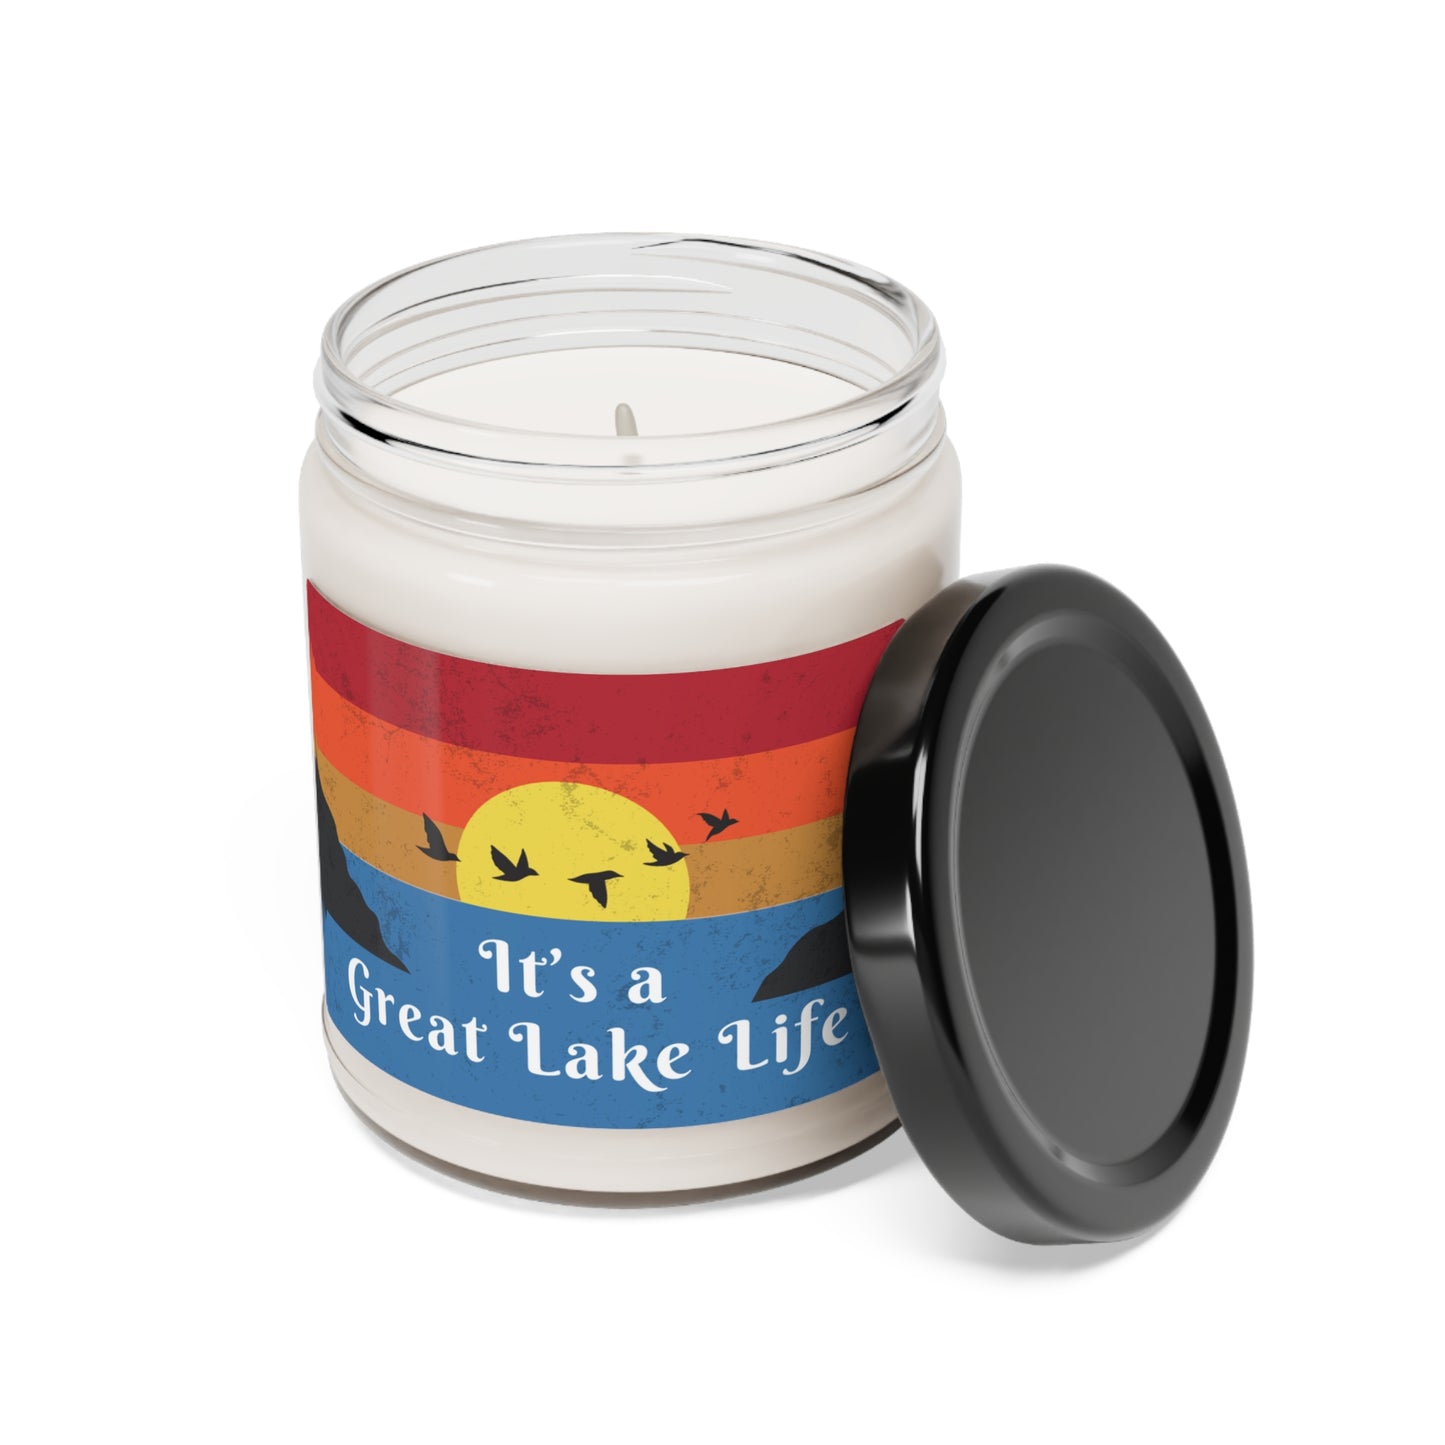 It's a Great Lake Life Scented Soy Candle, 9oz